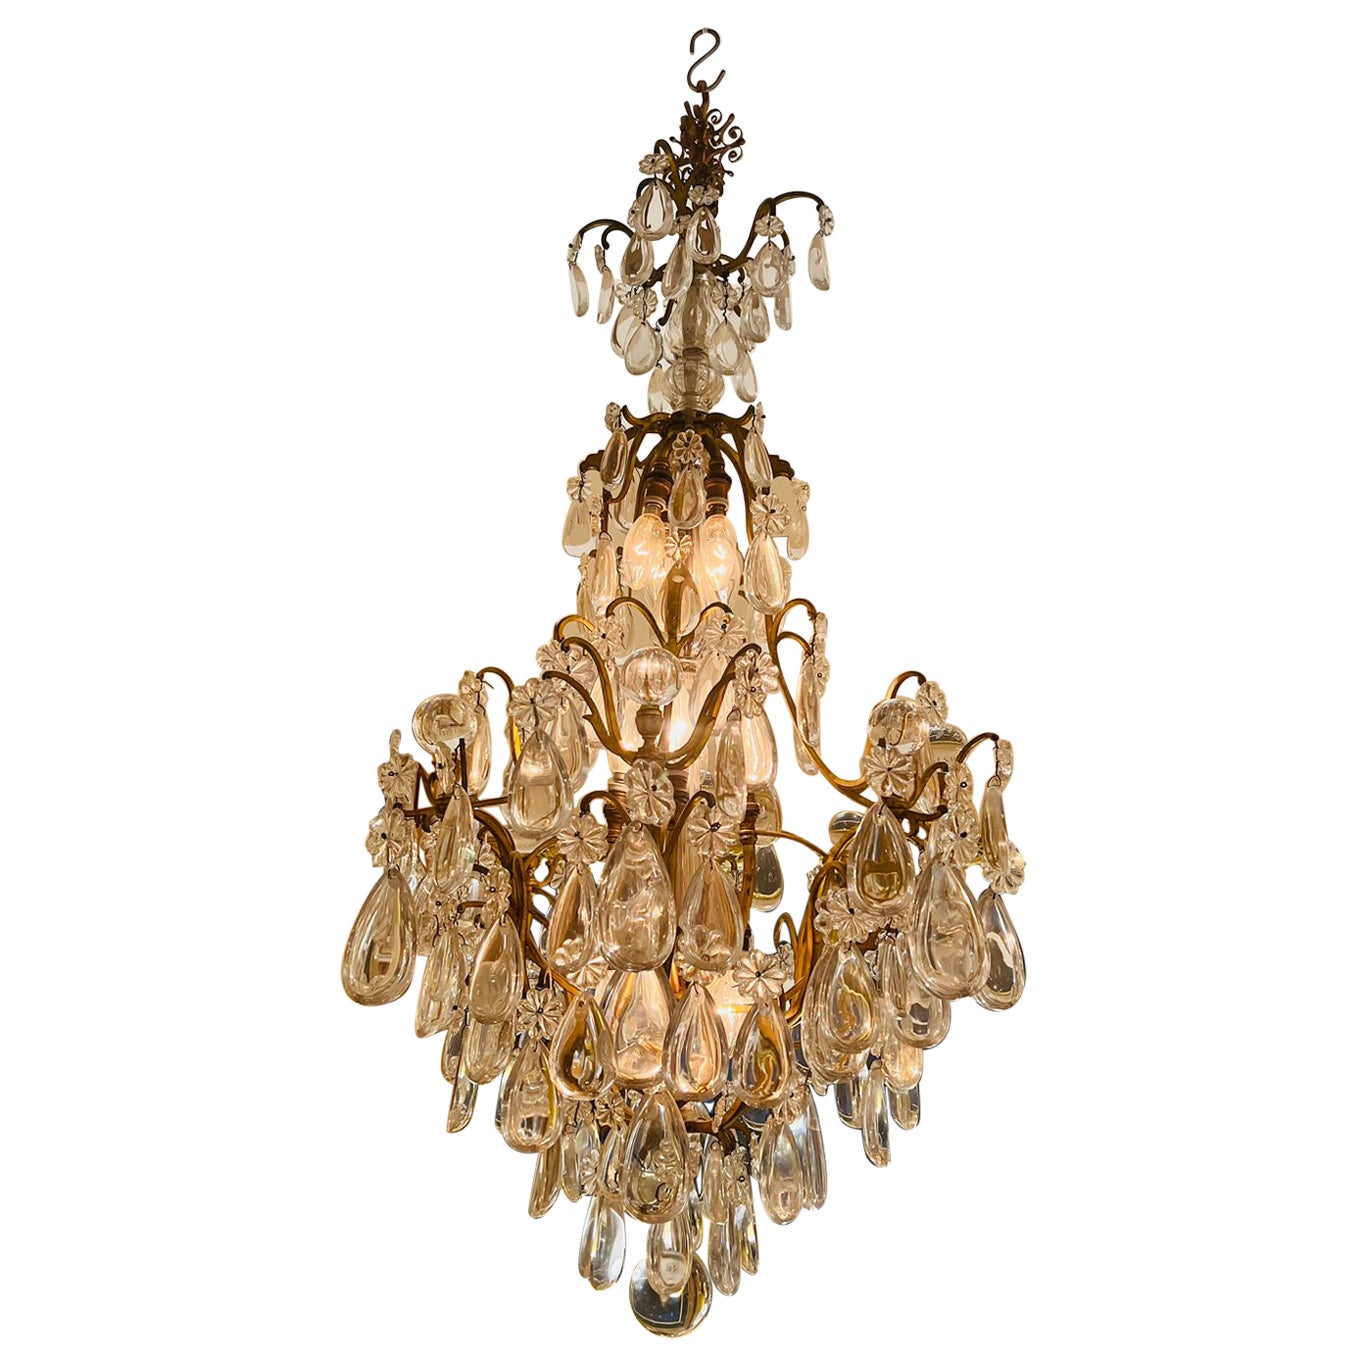 Maison Jansen french chandelier in rock cristal, glass and metal circa 1930